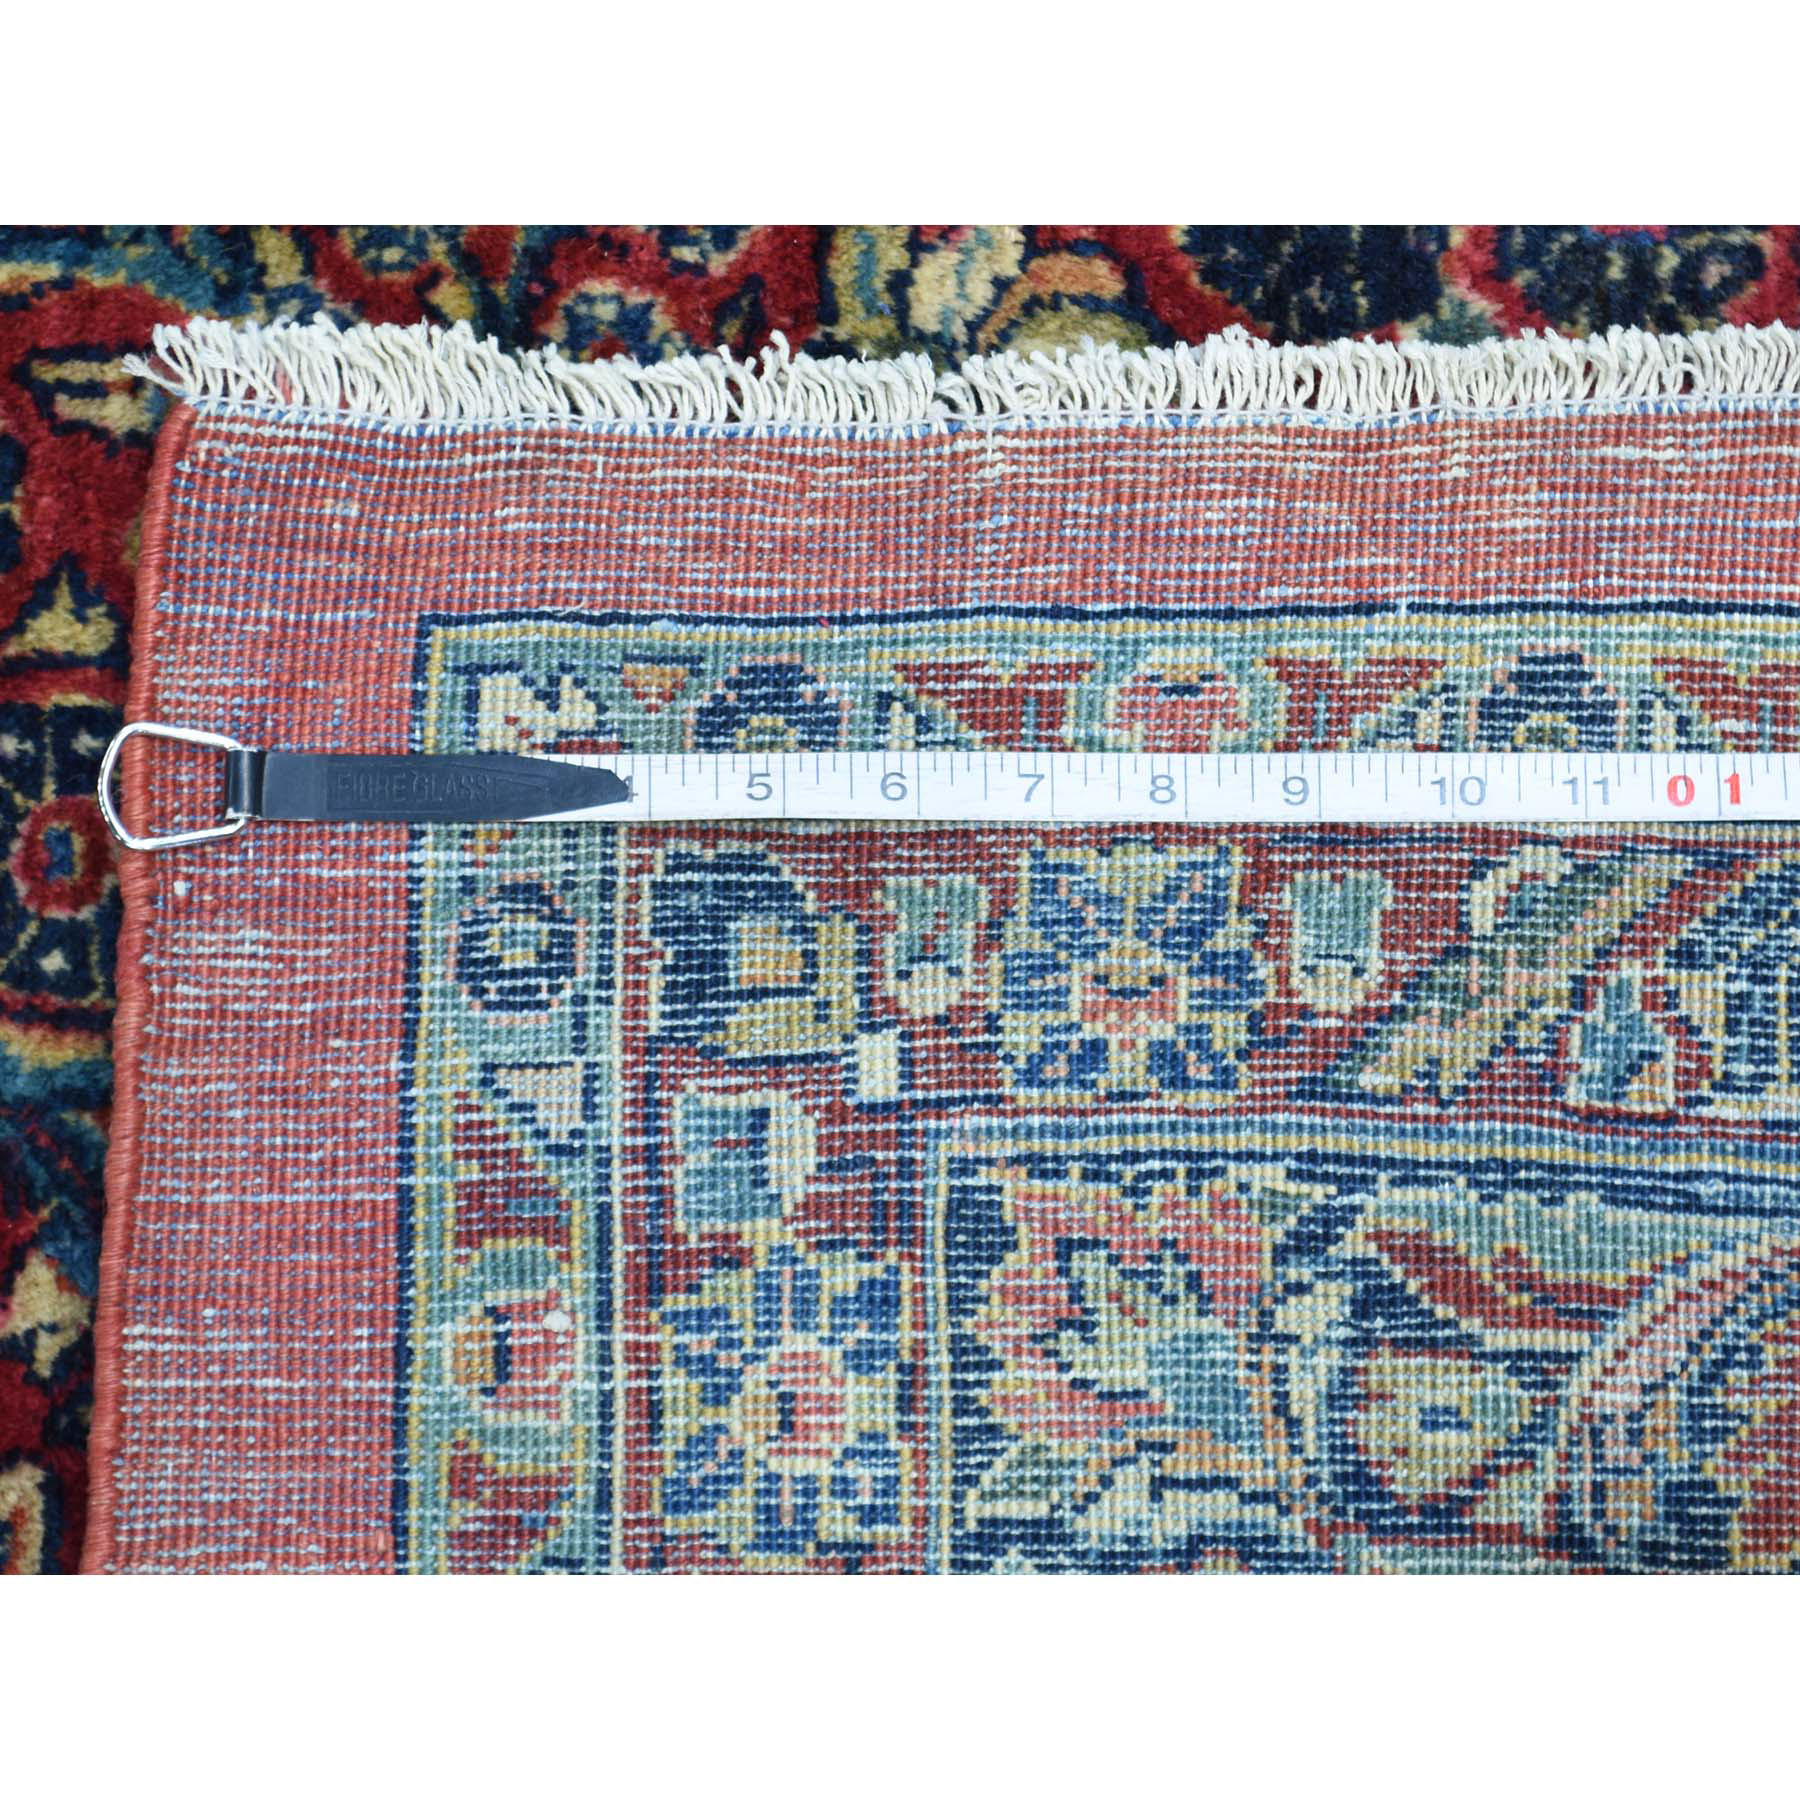 9-x25-7  Hand-Knotted Antique Persian Sarouk Gallery Size Exc Cond Rug 